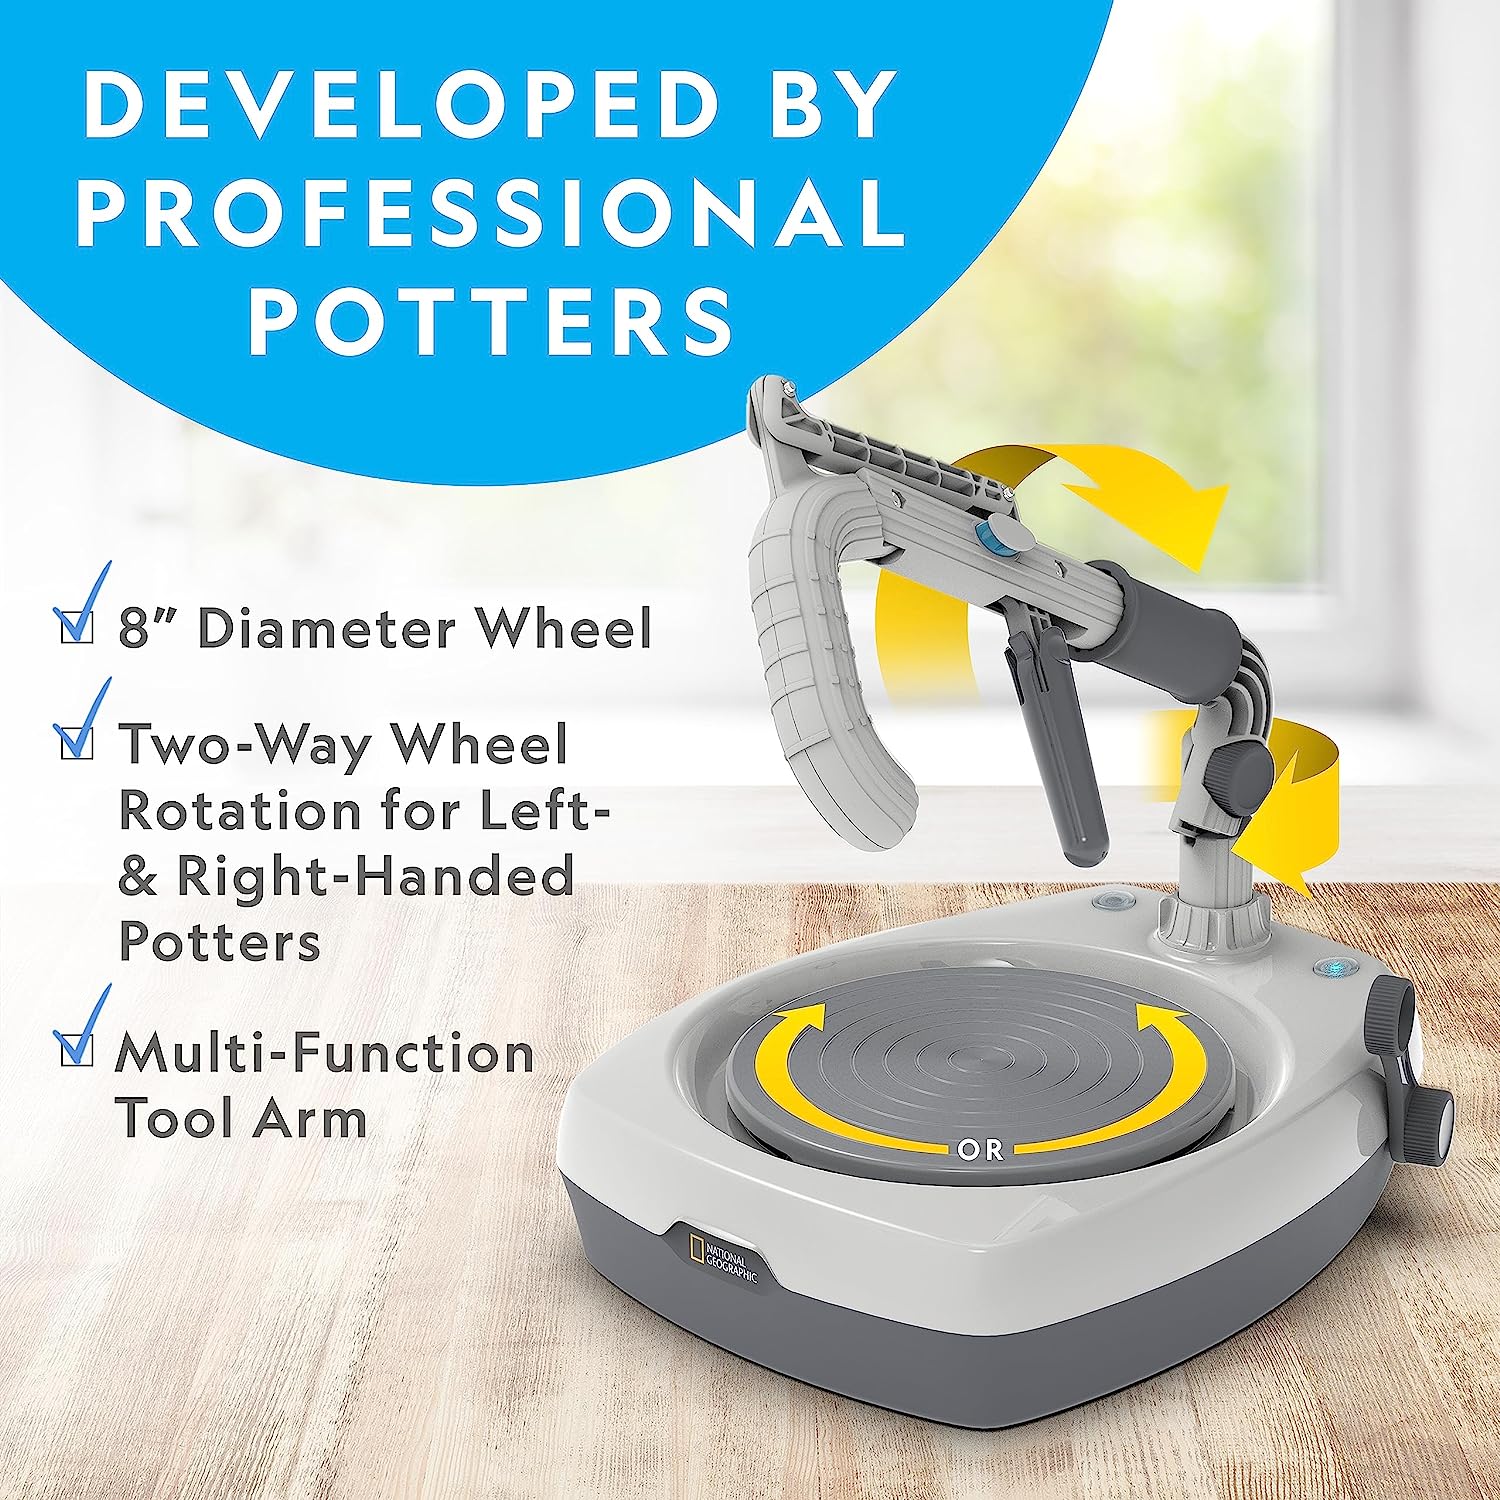 NATIONAL GEOGRAPHIC Kid's Pottery Wheel - 1. Setting Up Your